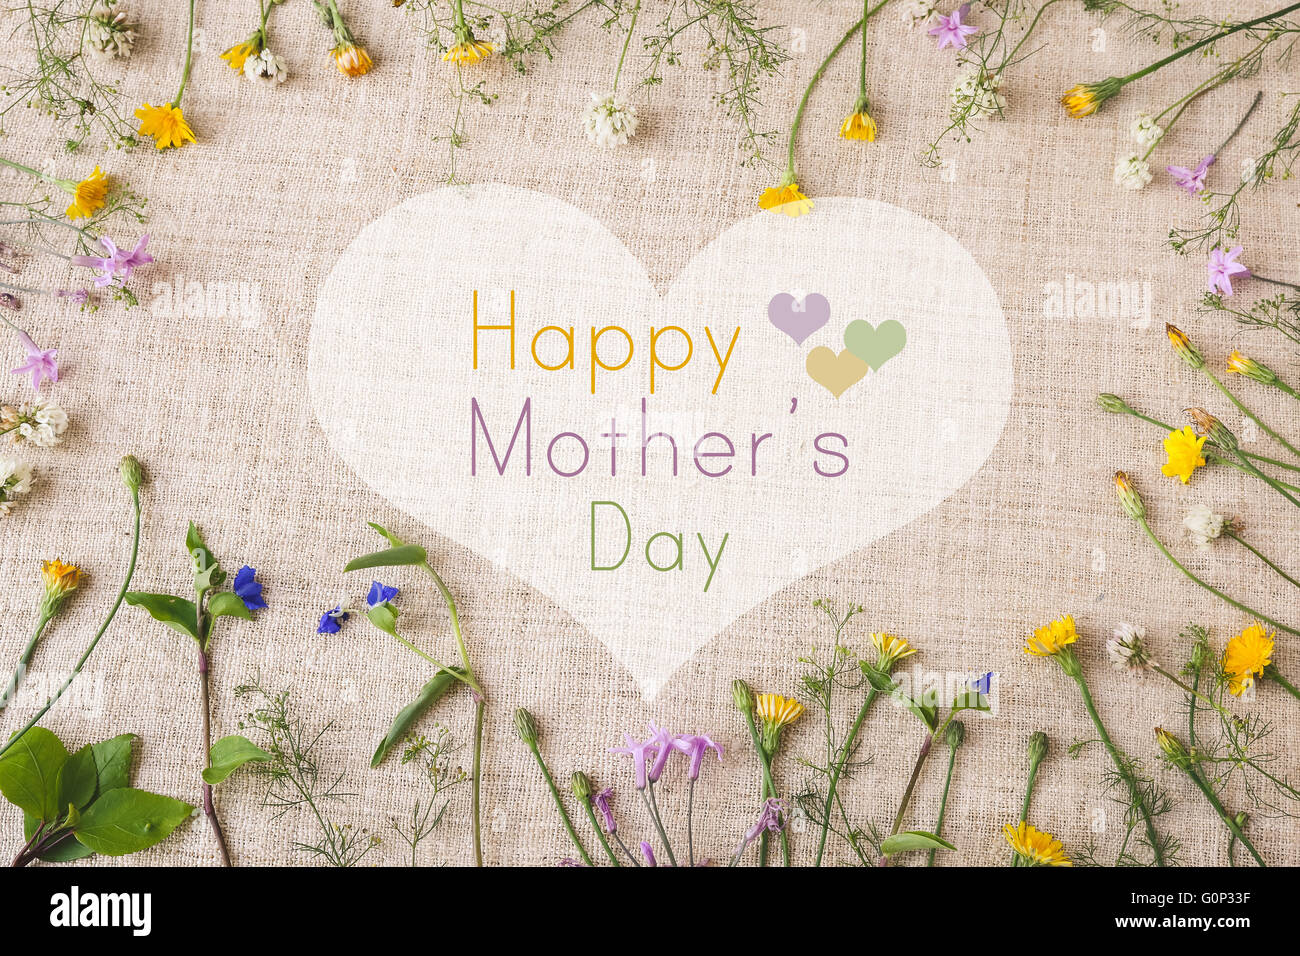 Happy Mother's Day wildflowers background Stock Photo